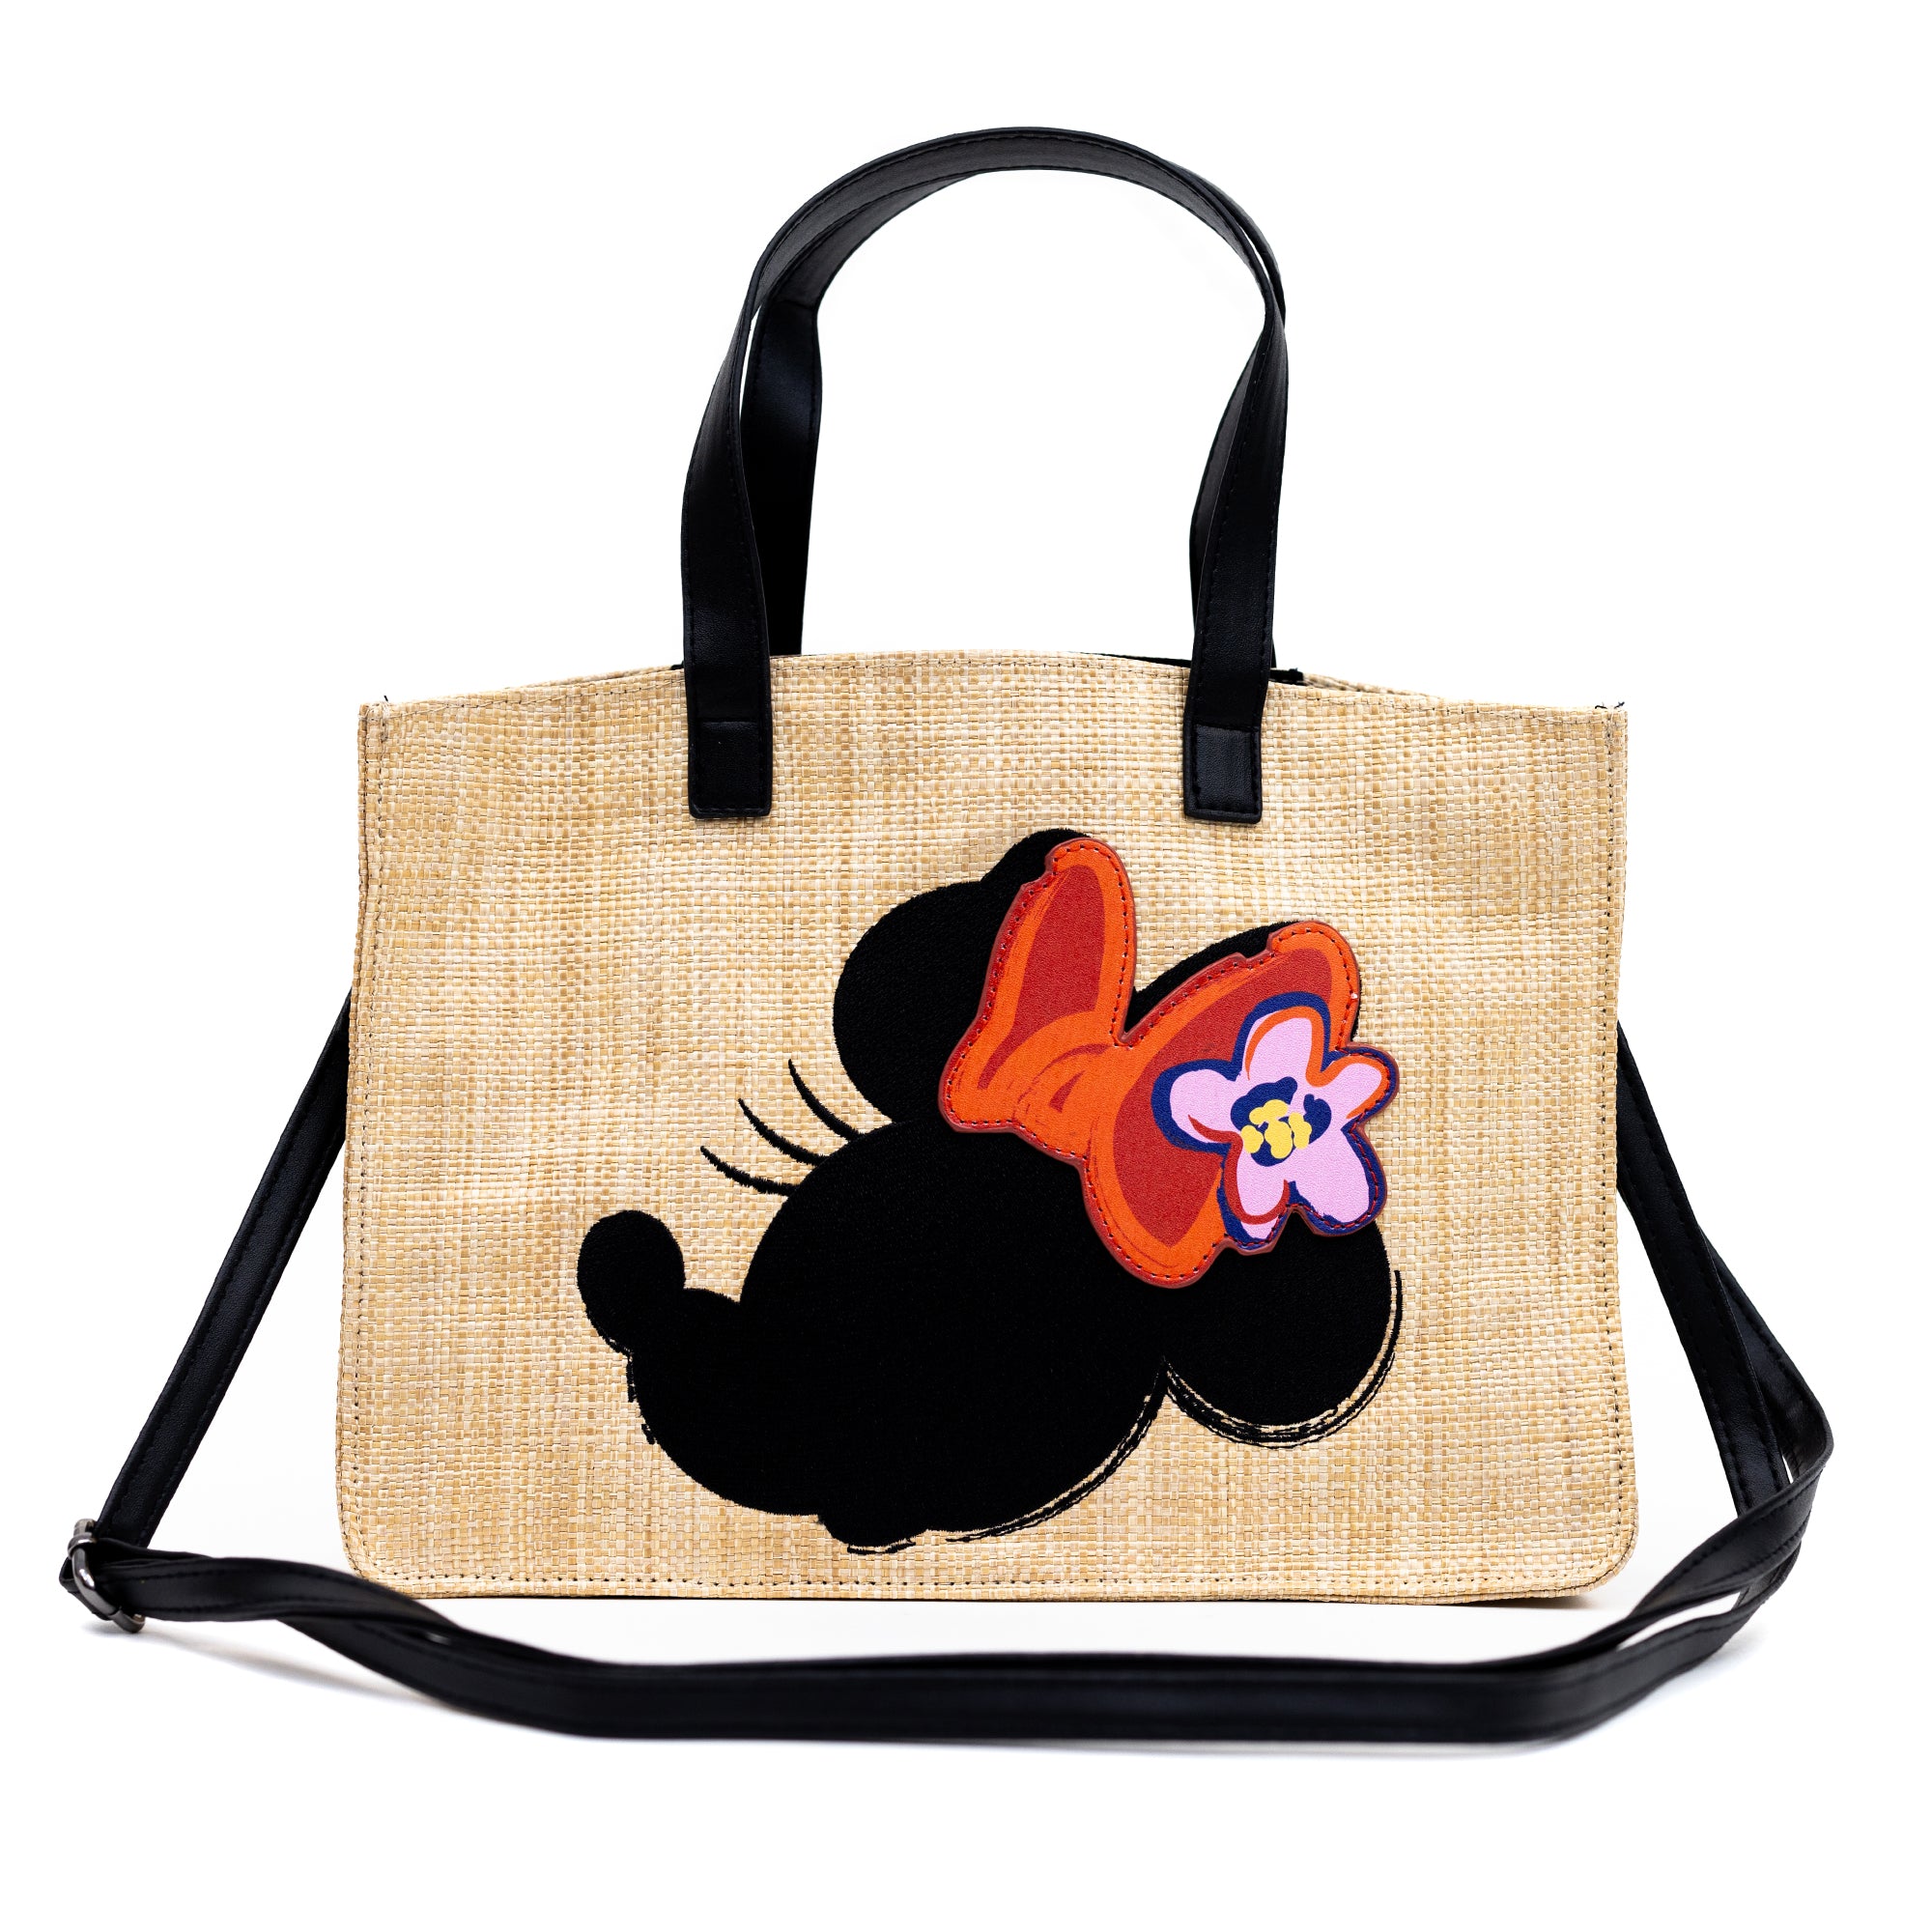 Disney Disney Minnie Mouse Embroidered Raffia Collection Tote Crossbody Bag